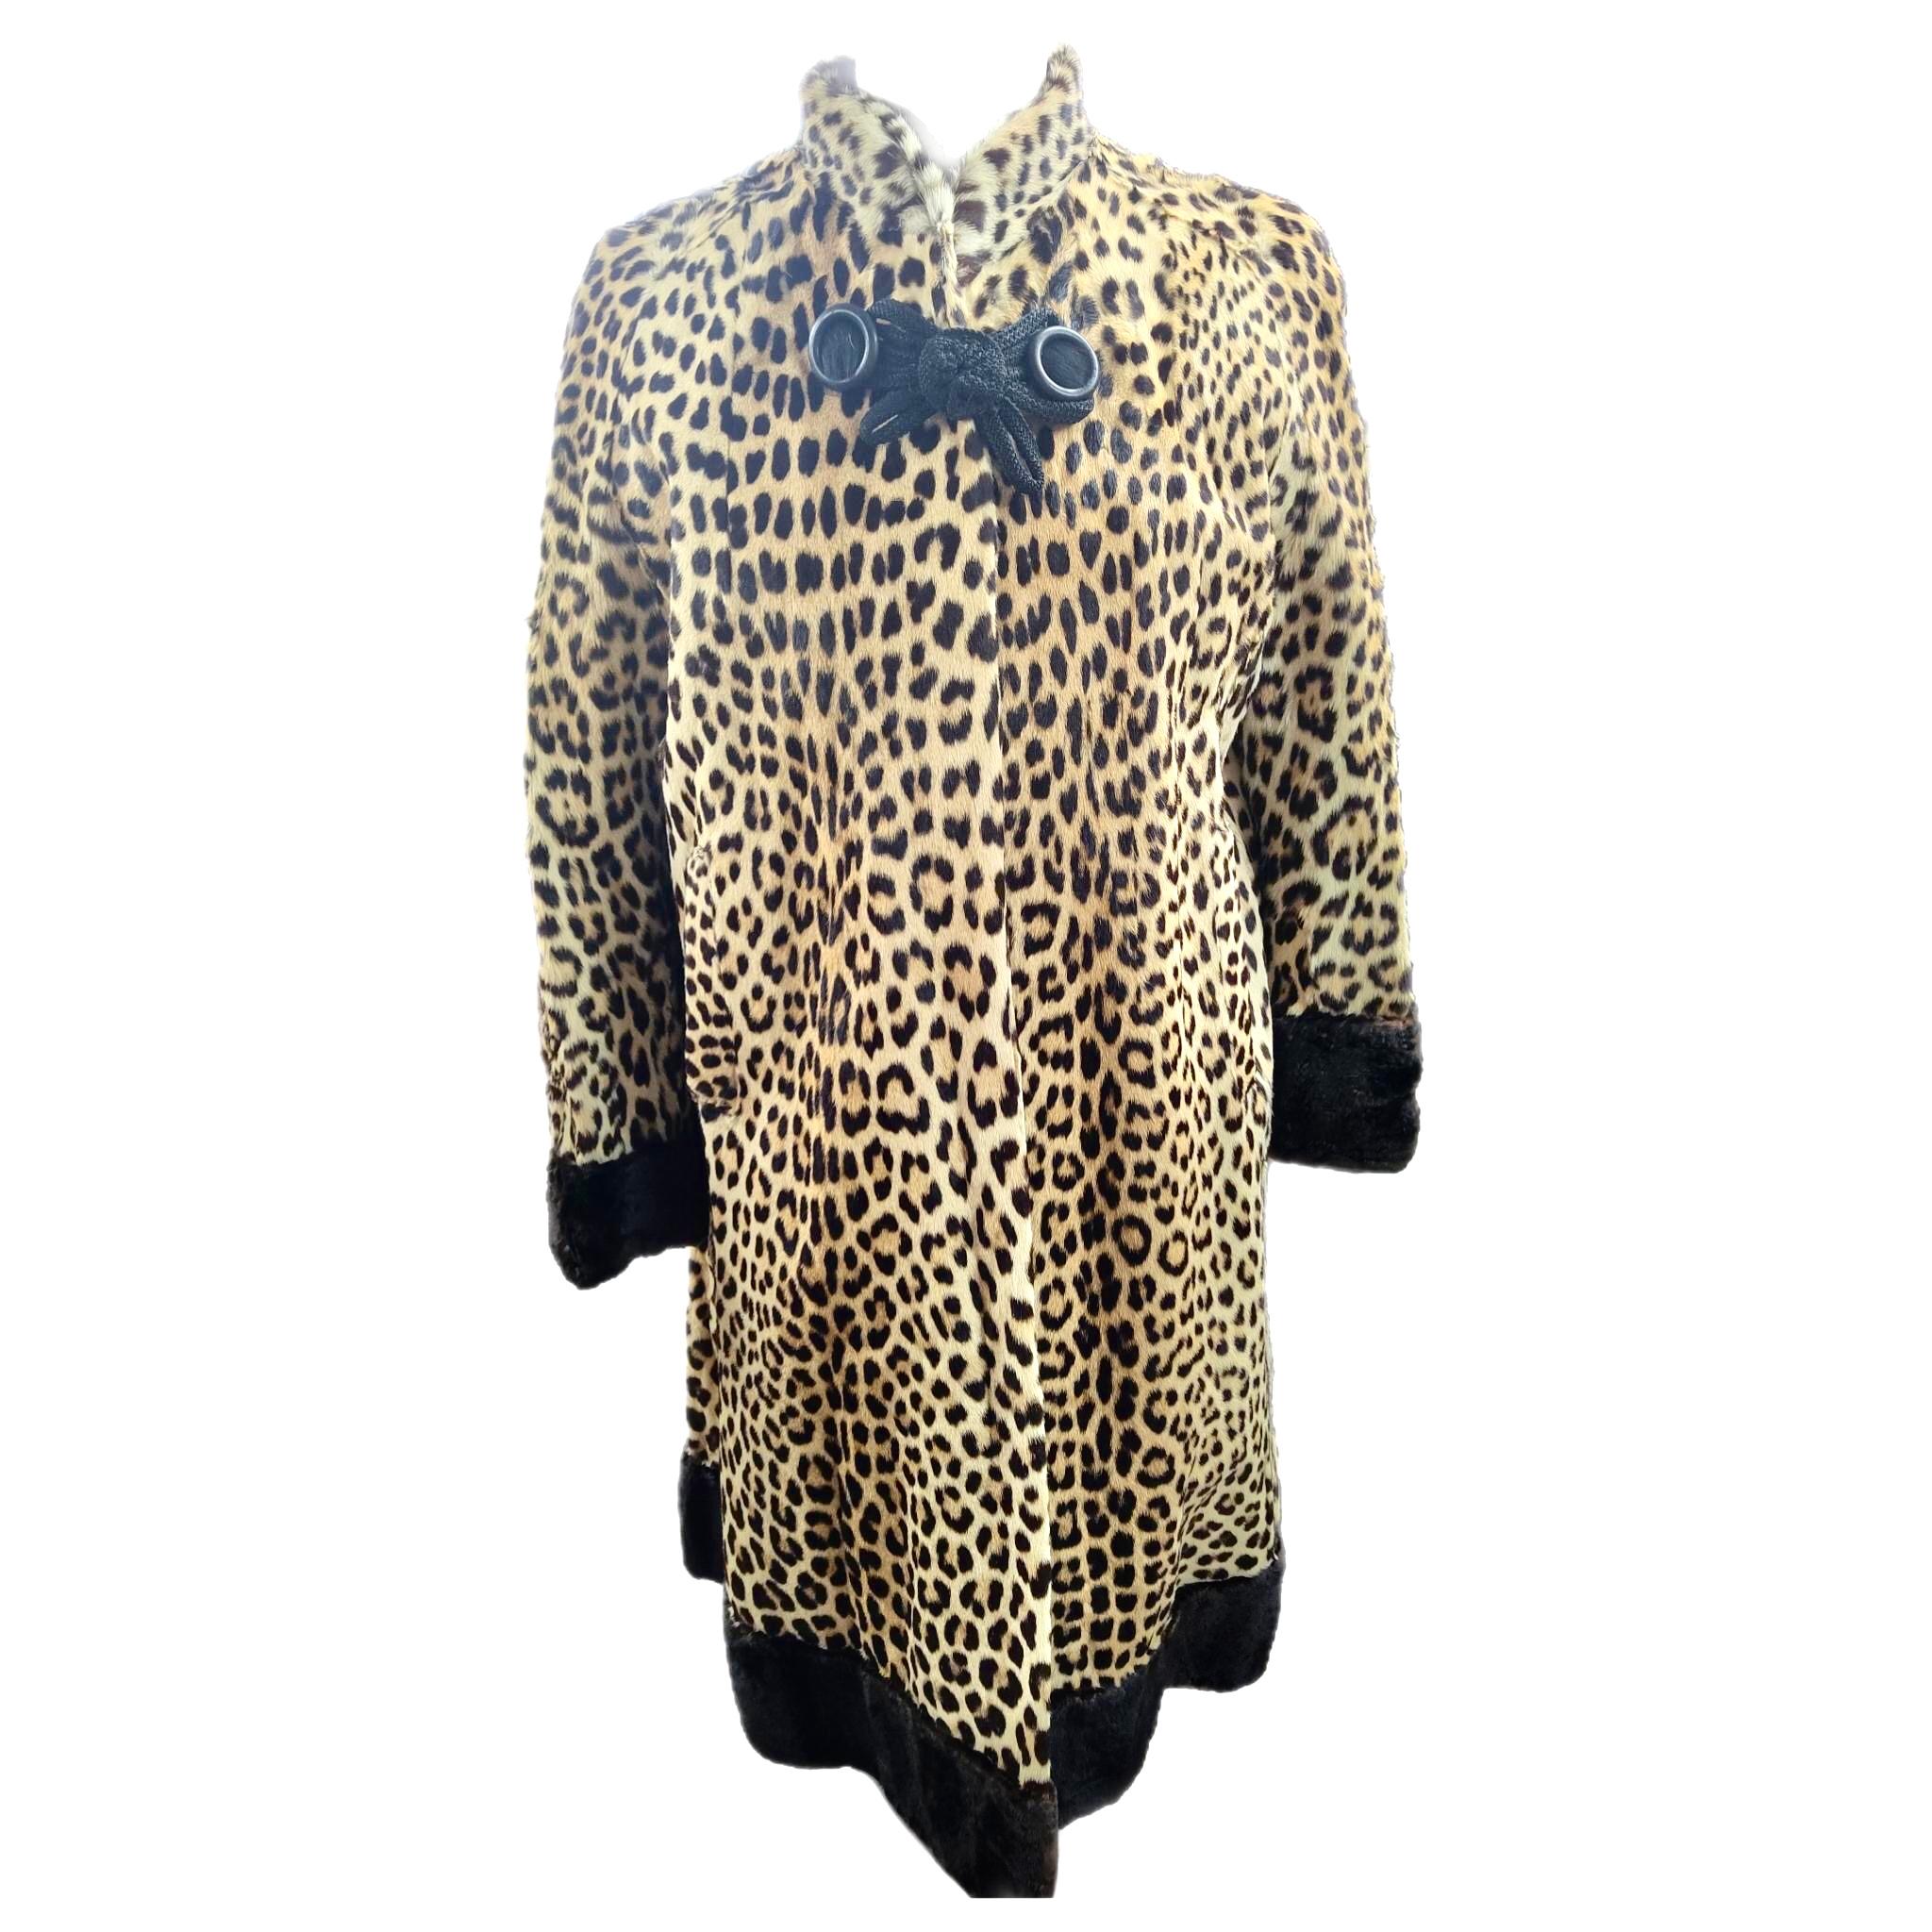 PRODUCT DESCRIPTION:

Vintage leopard fur coat size 10

Absolutely brilliant piece of history a rare exotic vibrant colourful real leopard fur. In brand new condition has never been worn. unused lining. Impeccable supple skins, nice wide sweep and